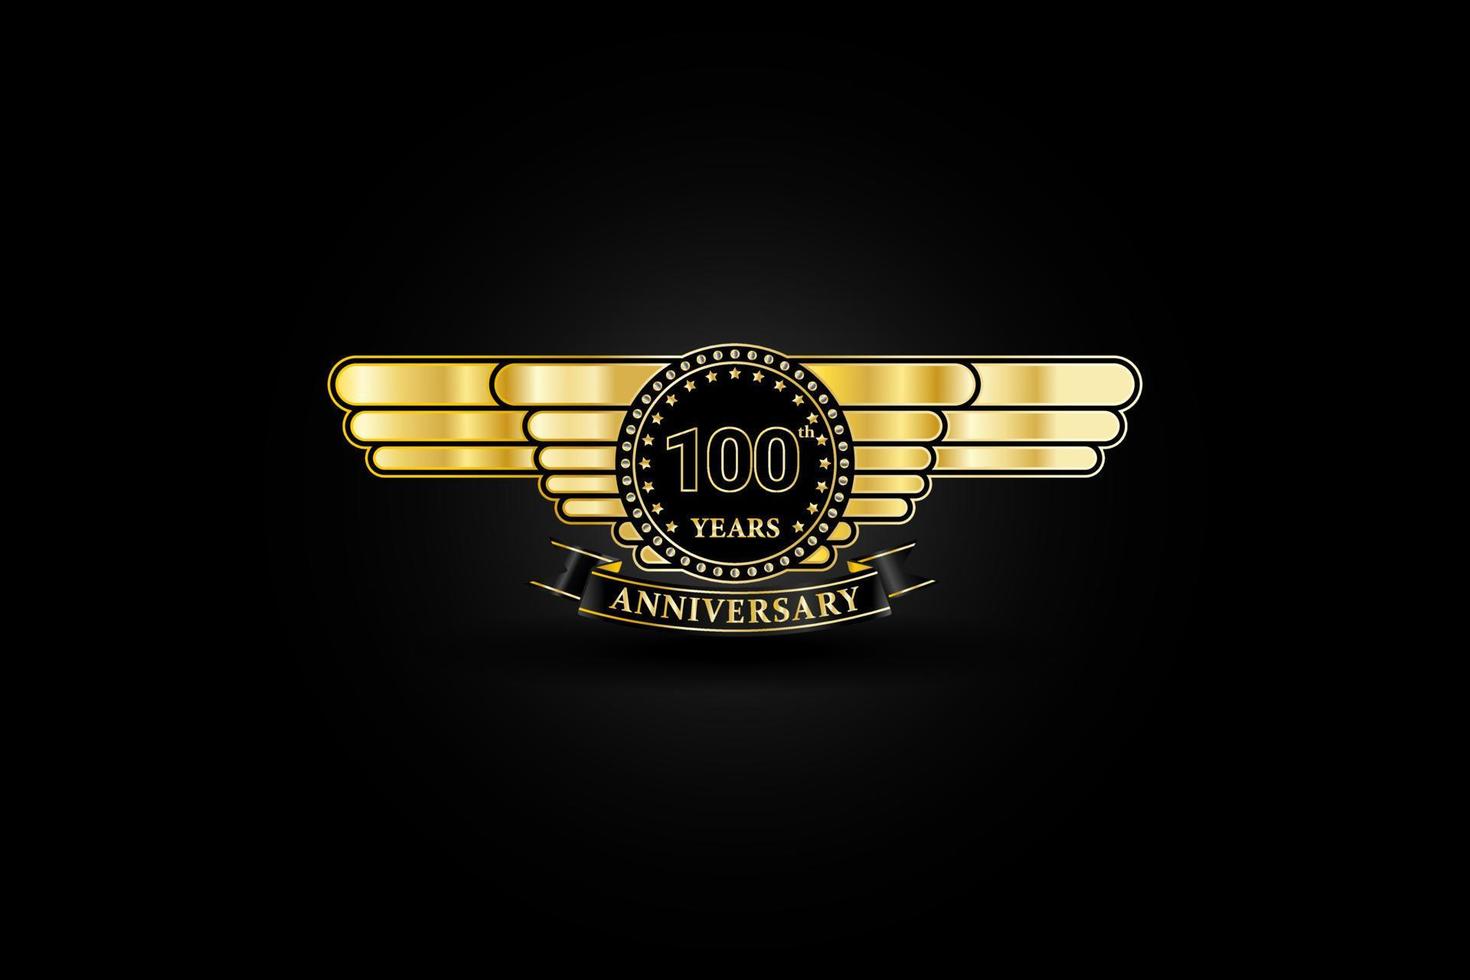 100th anniversary golden gold logo with gold wing and ribbon isolated on black background, vector design for celebration.